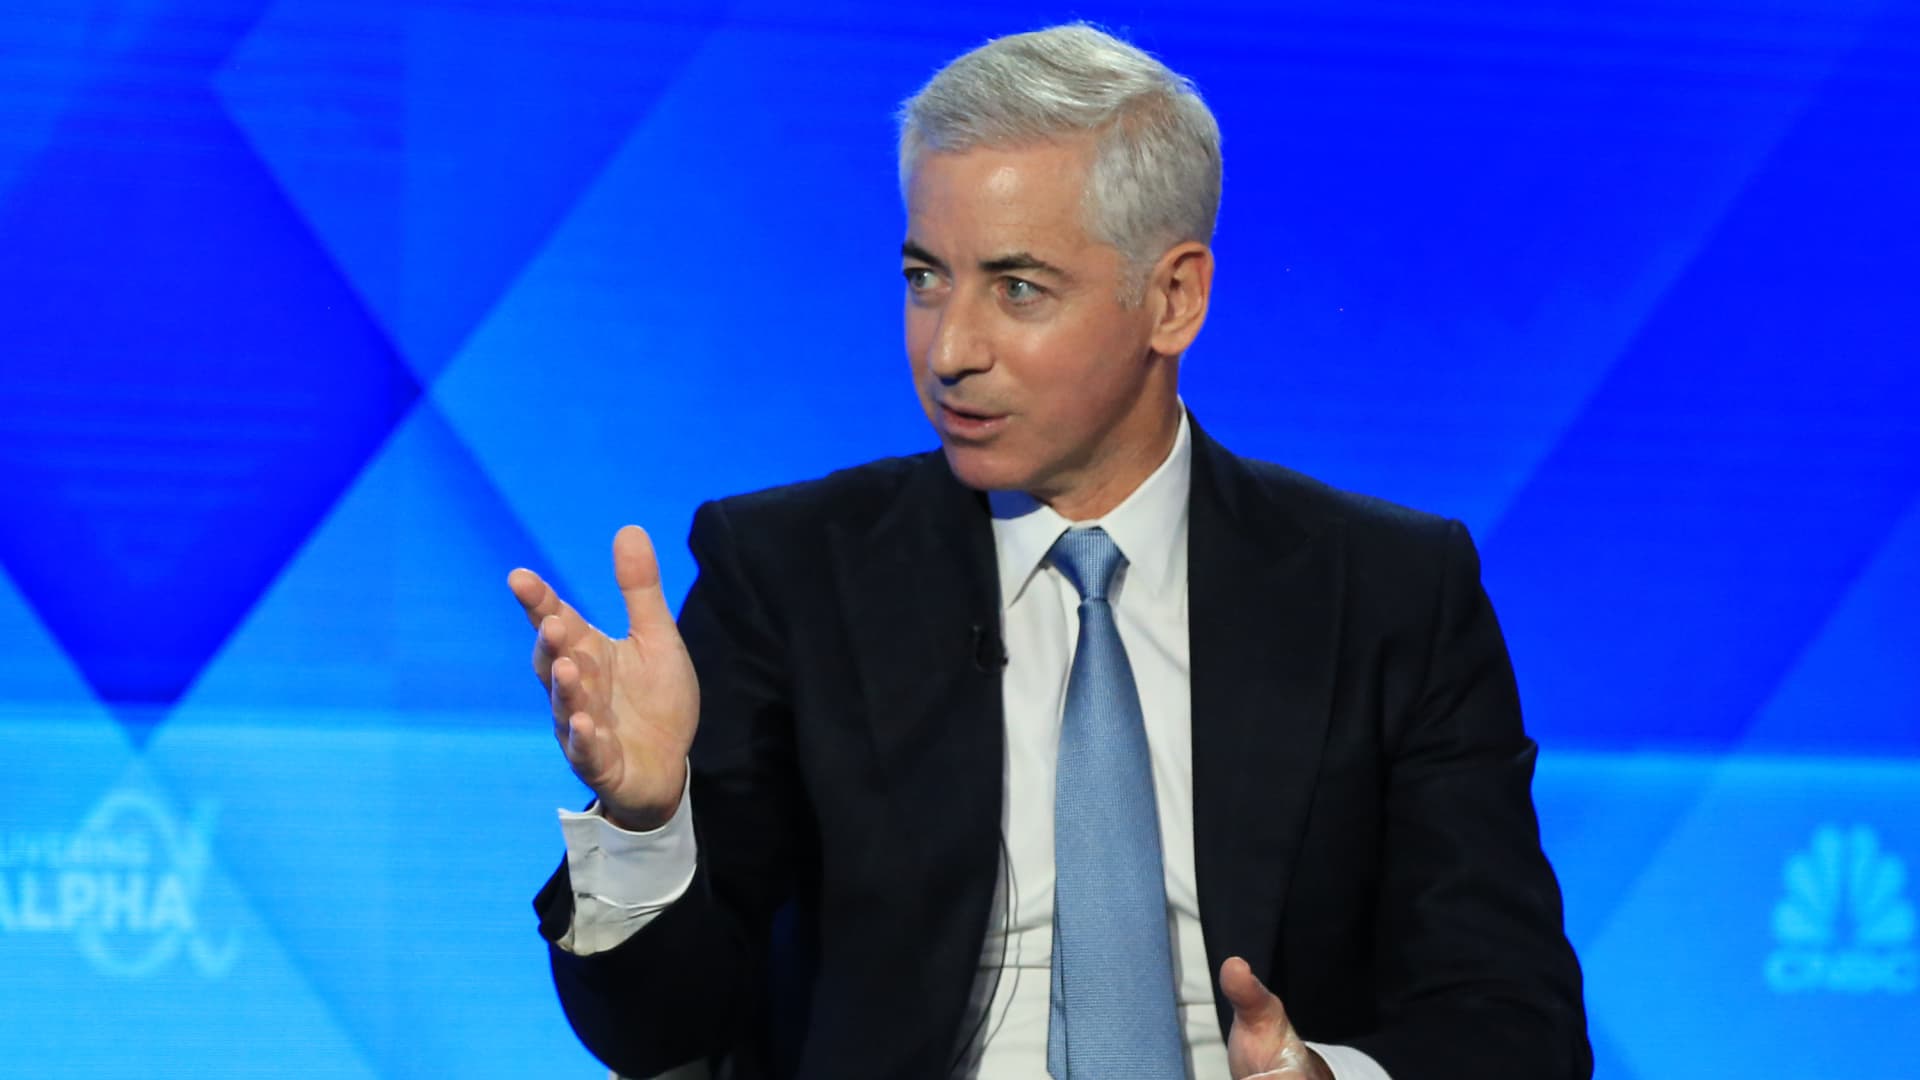 Bill Ackman is creating an activist organization to fight anti-Semitism and reform higher education